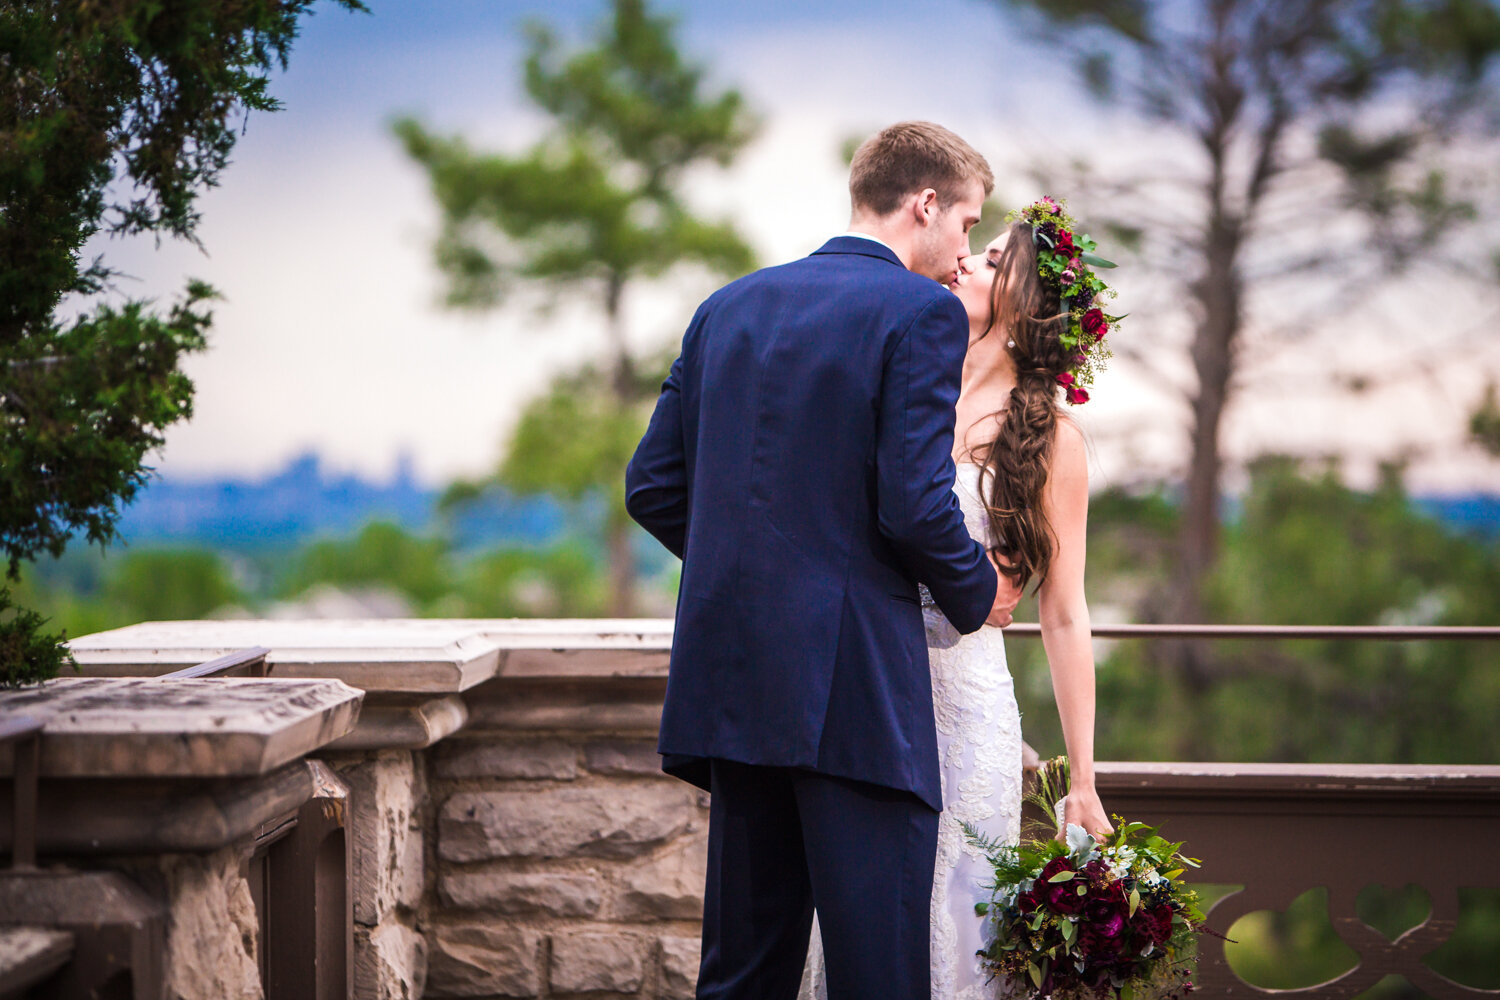  Bride and groom outside Highlands Ranch Mansion.&nbsp;&nbsp;  hotographed by JMGant Photography, Denver Colorado wedding photographer.&nbsp; 